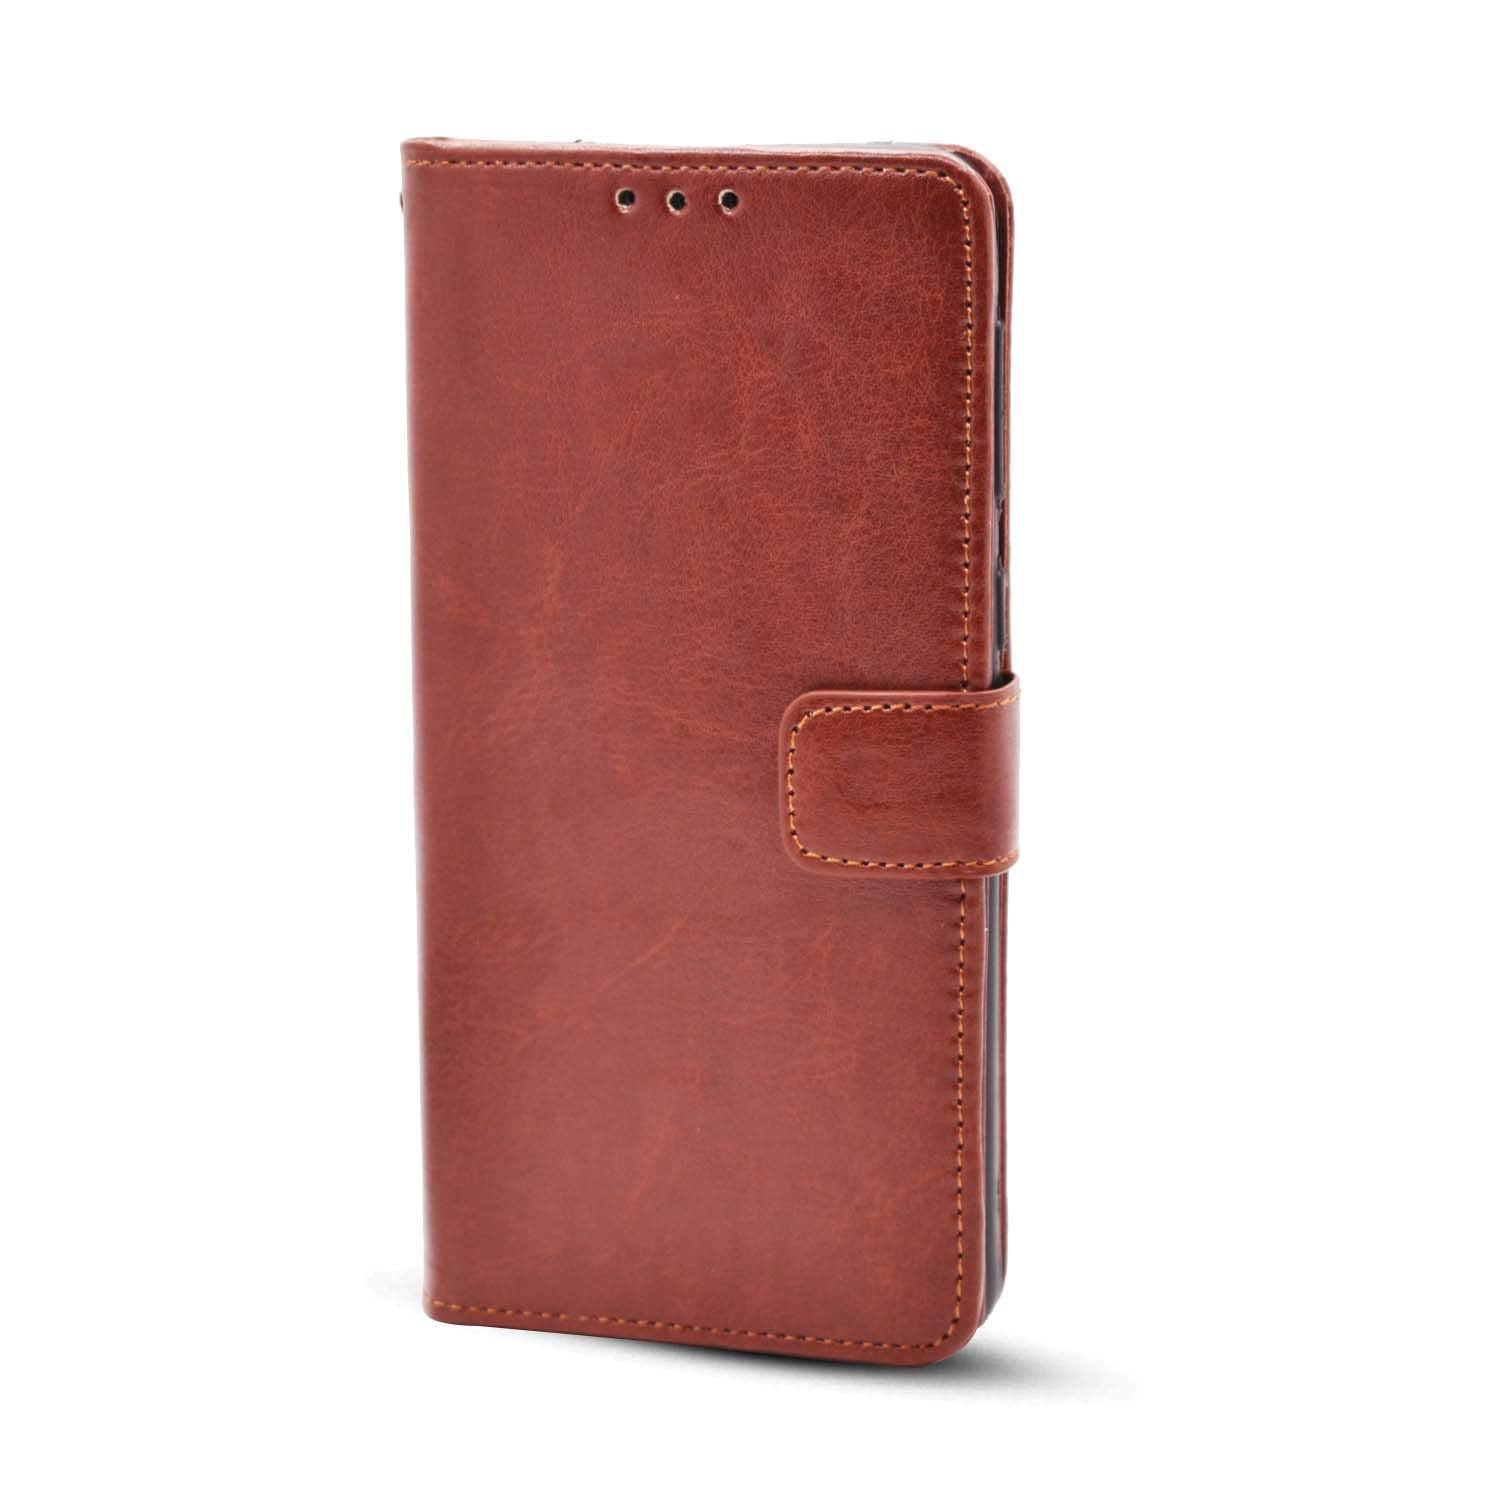 Bracevor Xiaomi Redmi 9A | 9i Flip Cover Case | Premium Leather | Inner TPU | Foldable Stand | Wallet Card Slots - Executive Brown